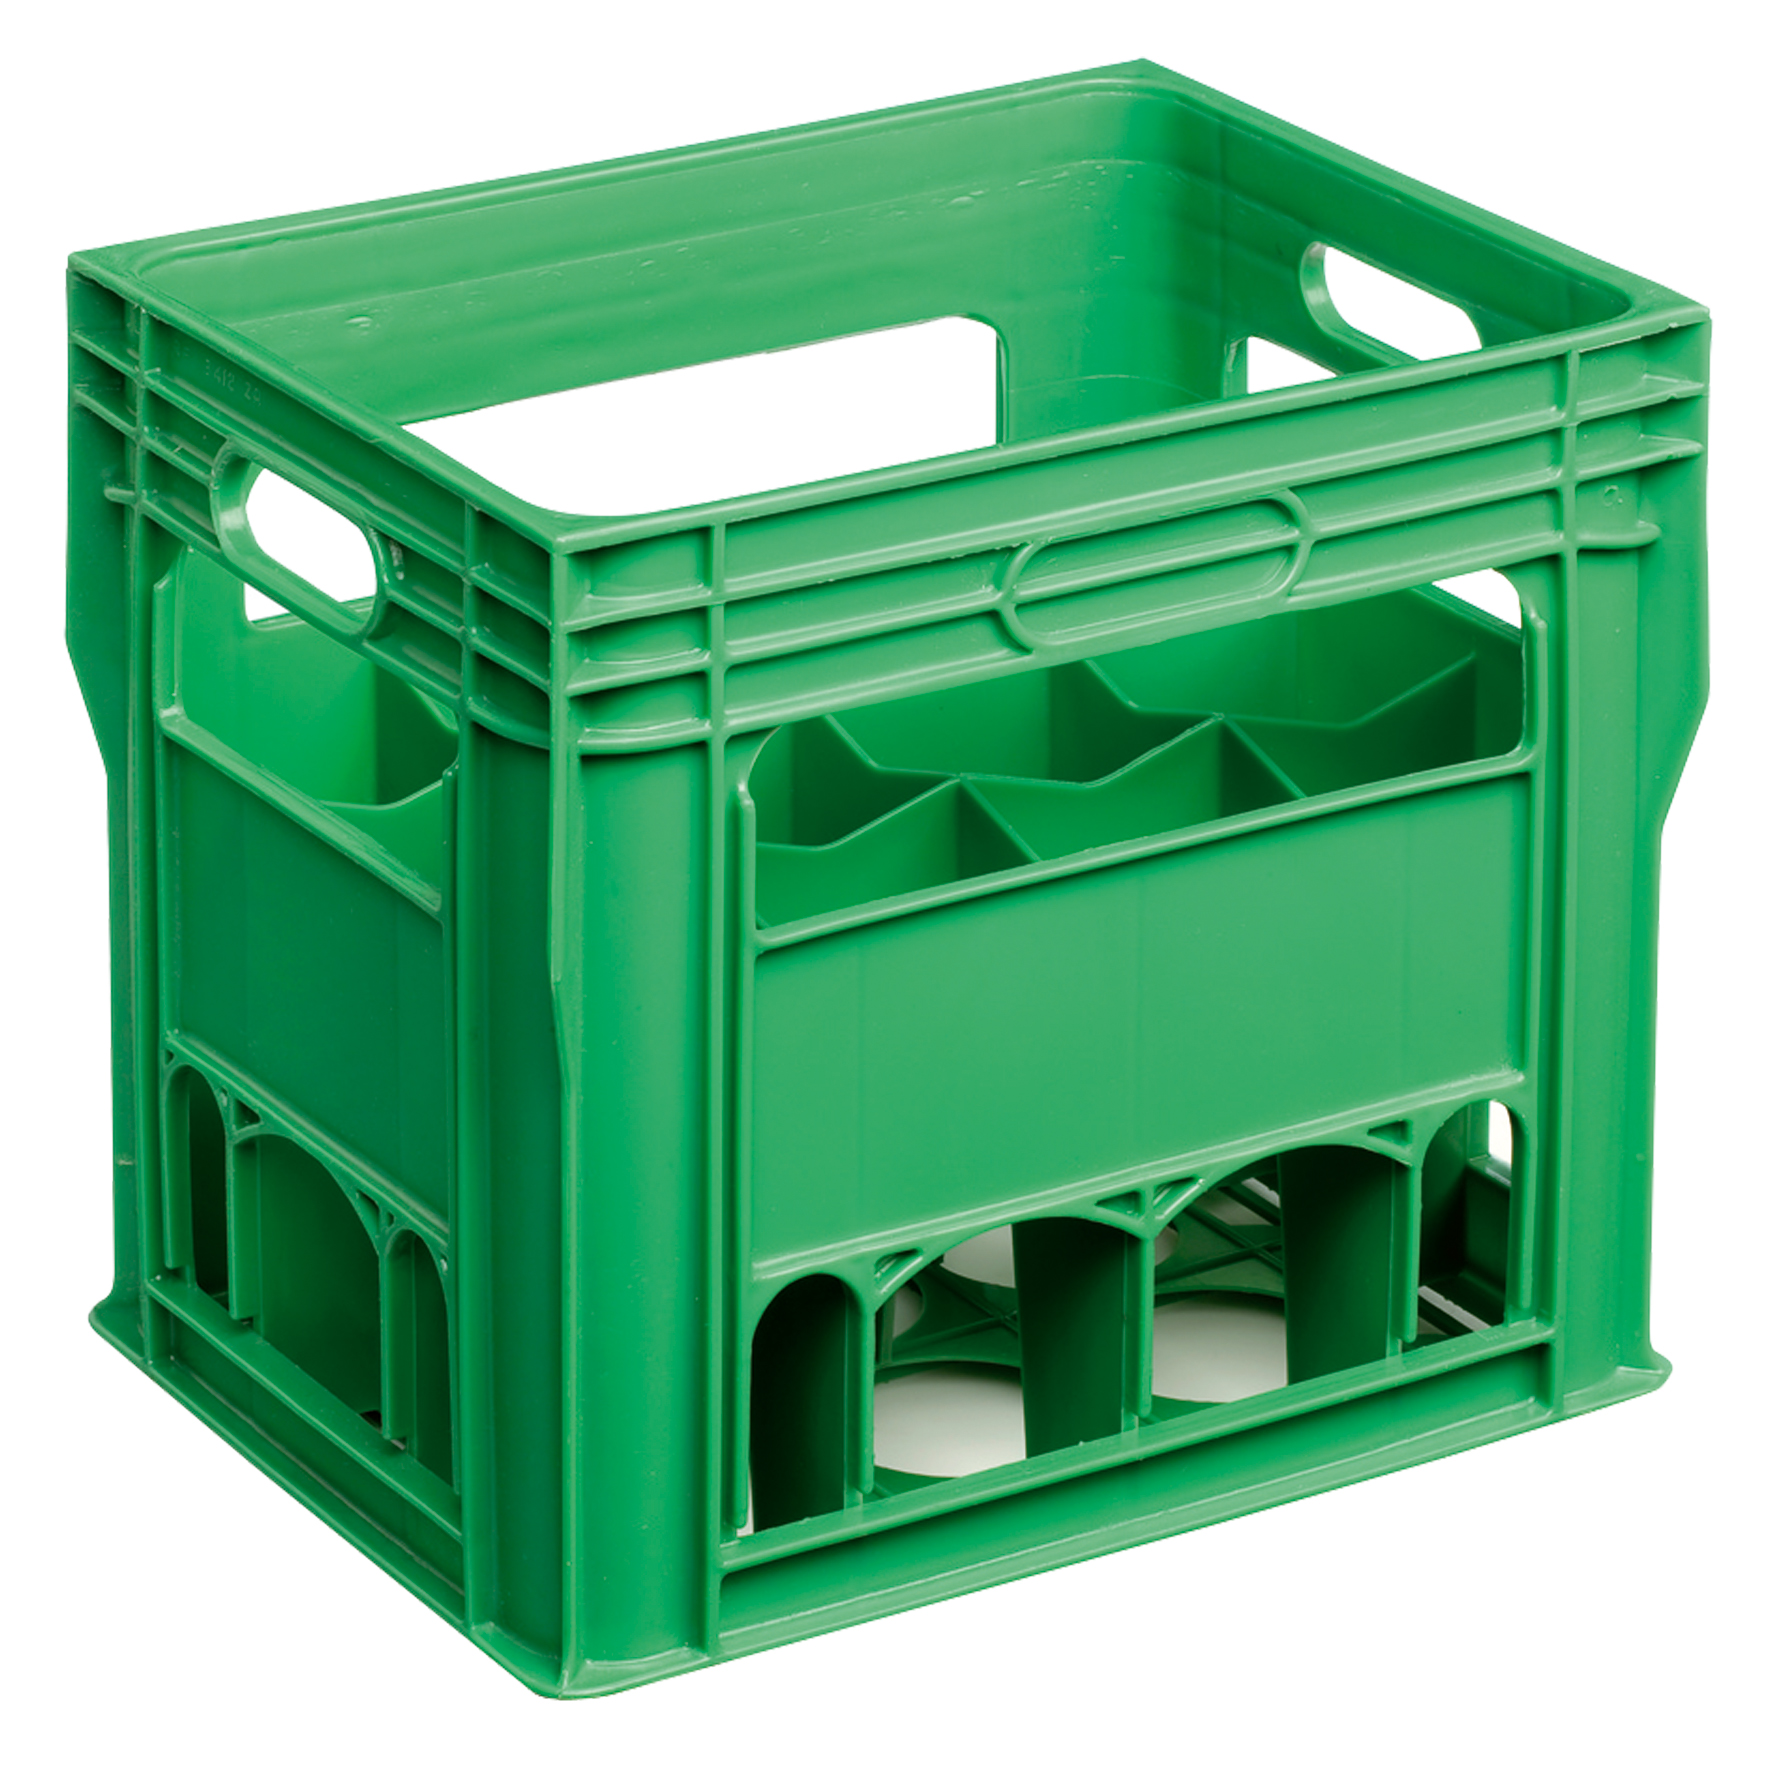 12 x 750ml Wine Bottle Plastic Stacking Crate